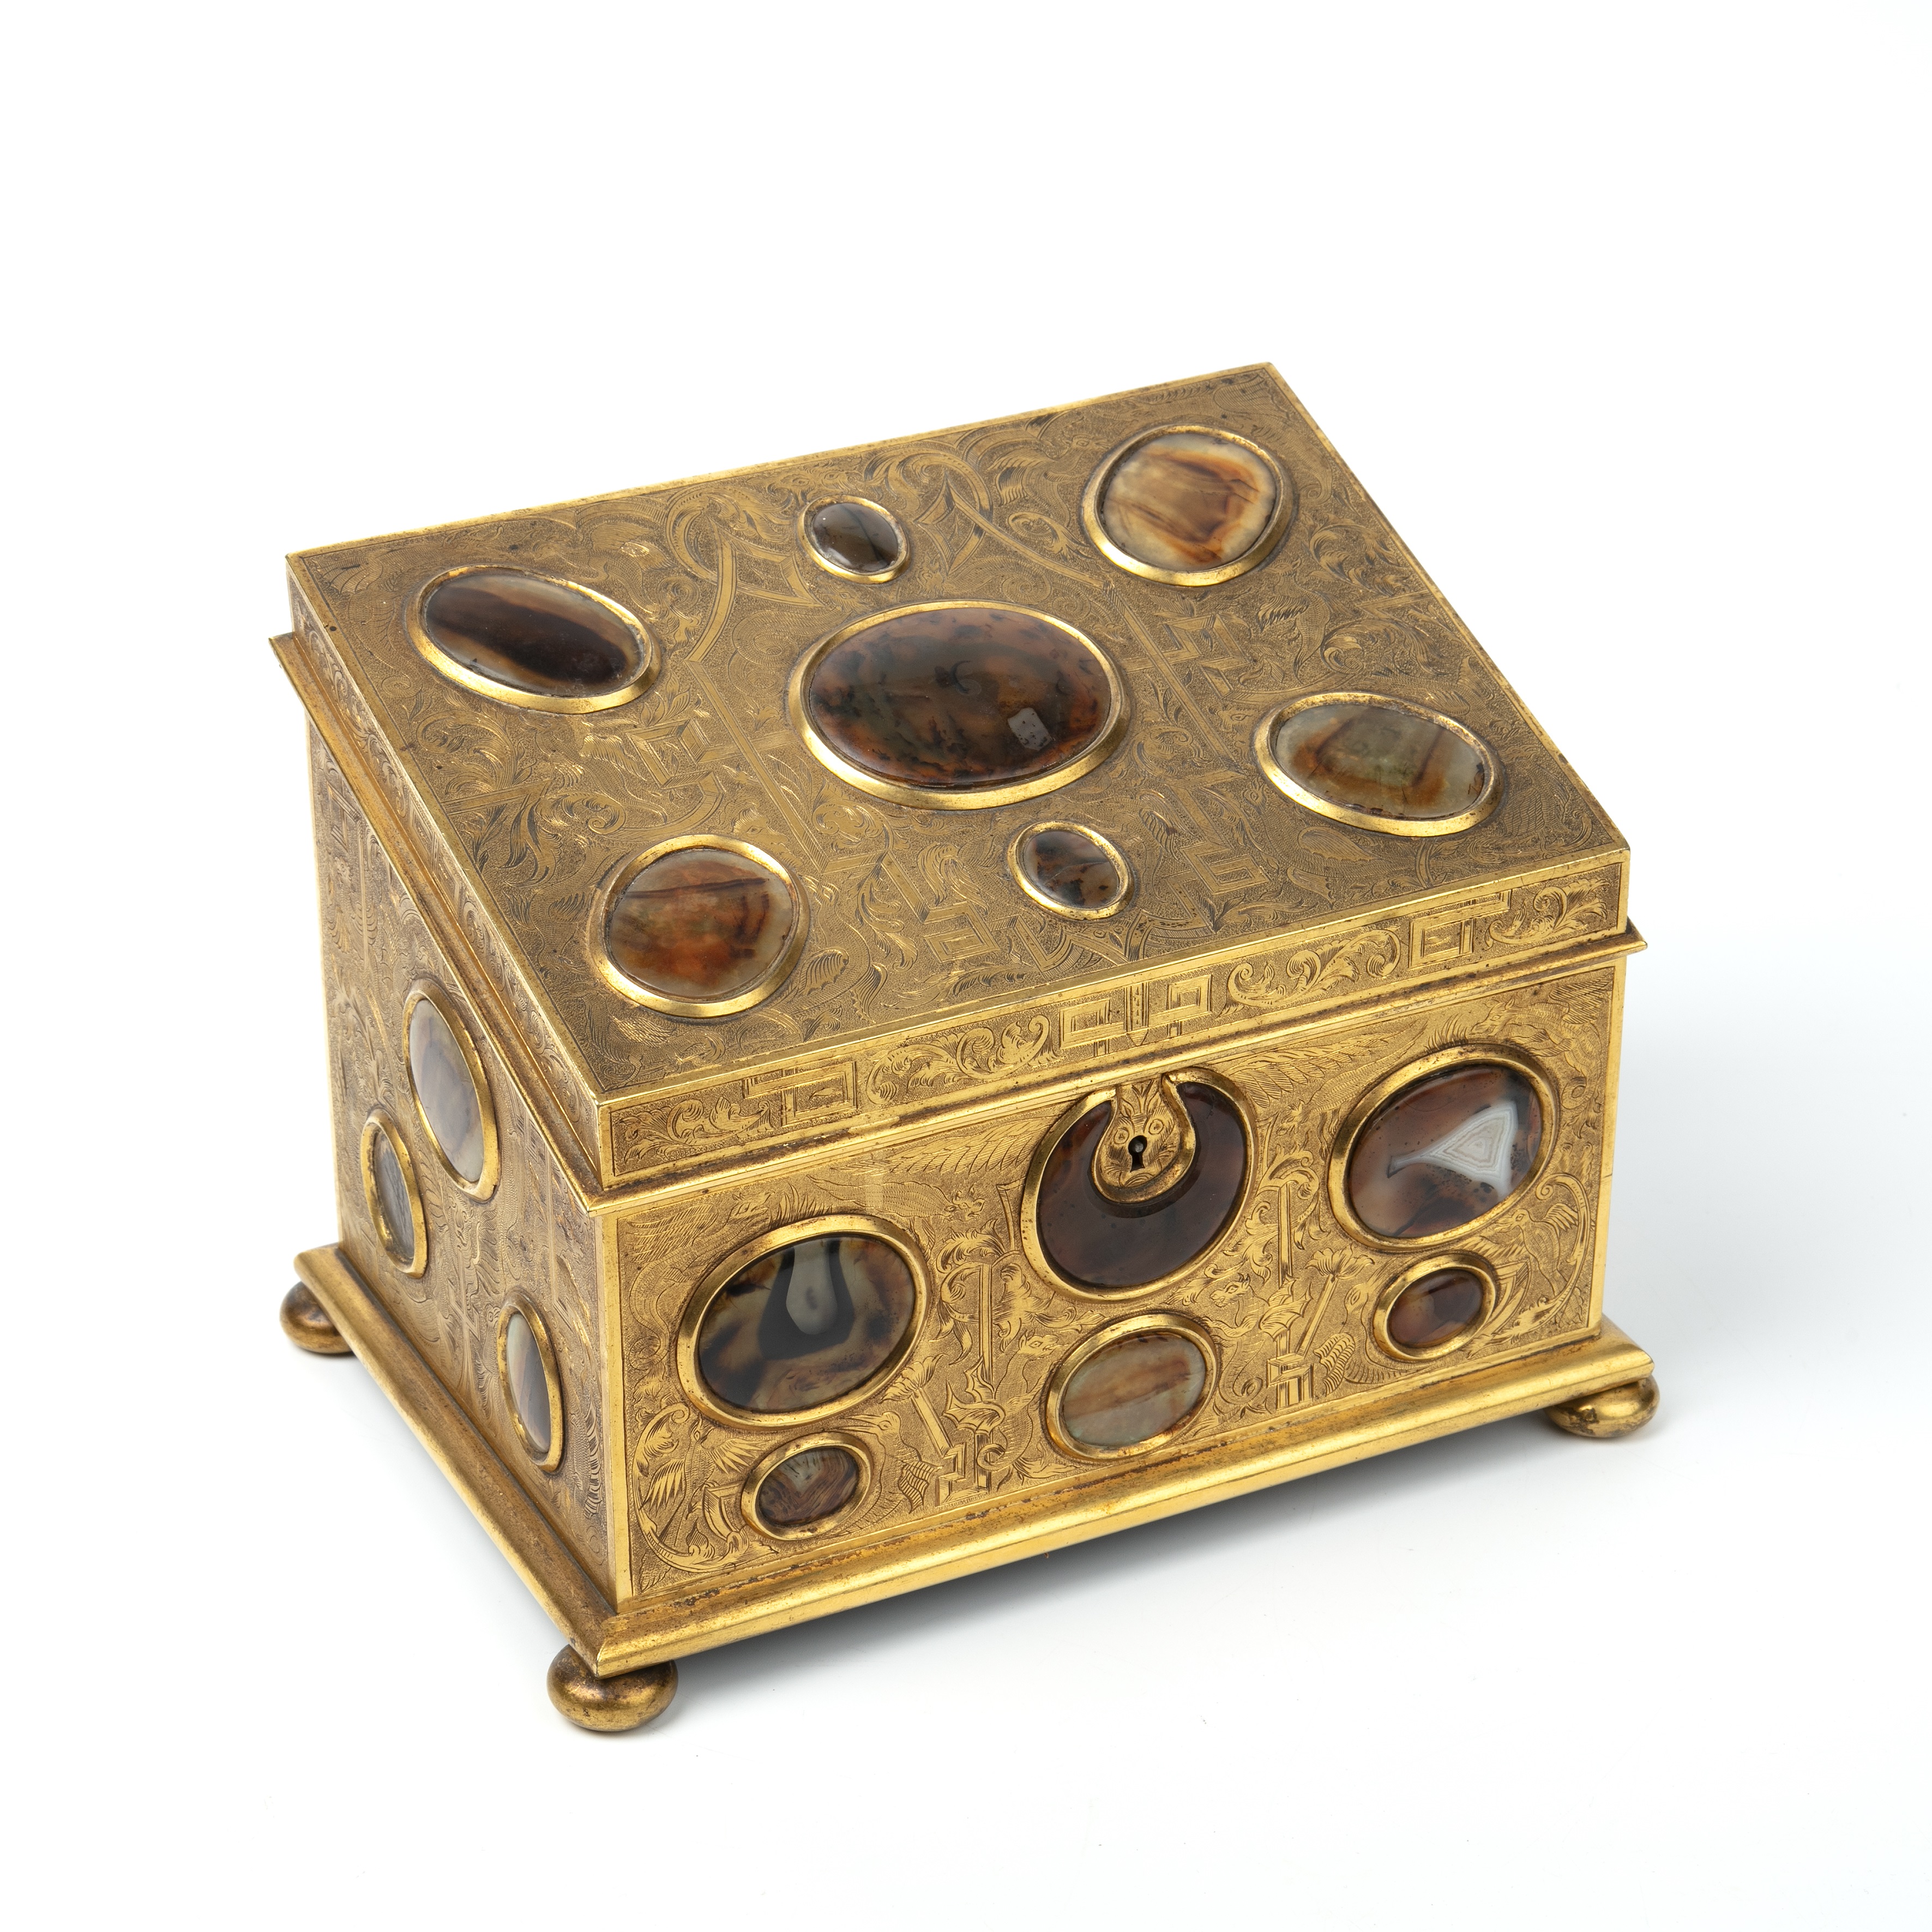 A 19th century correspondence gilt box with engraved decoration and inset cabochon stones hardstones